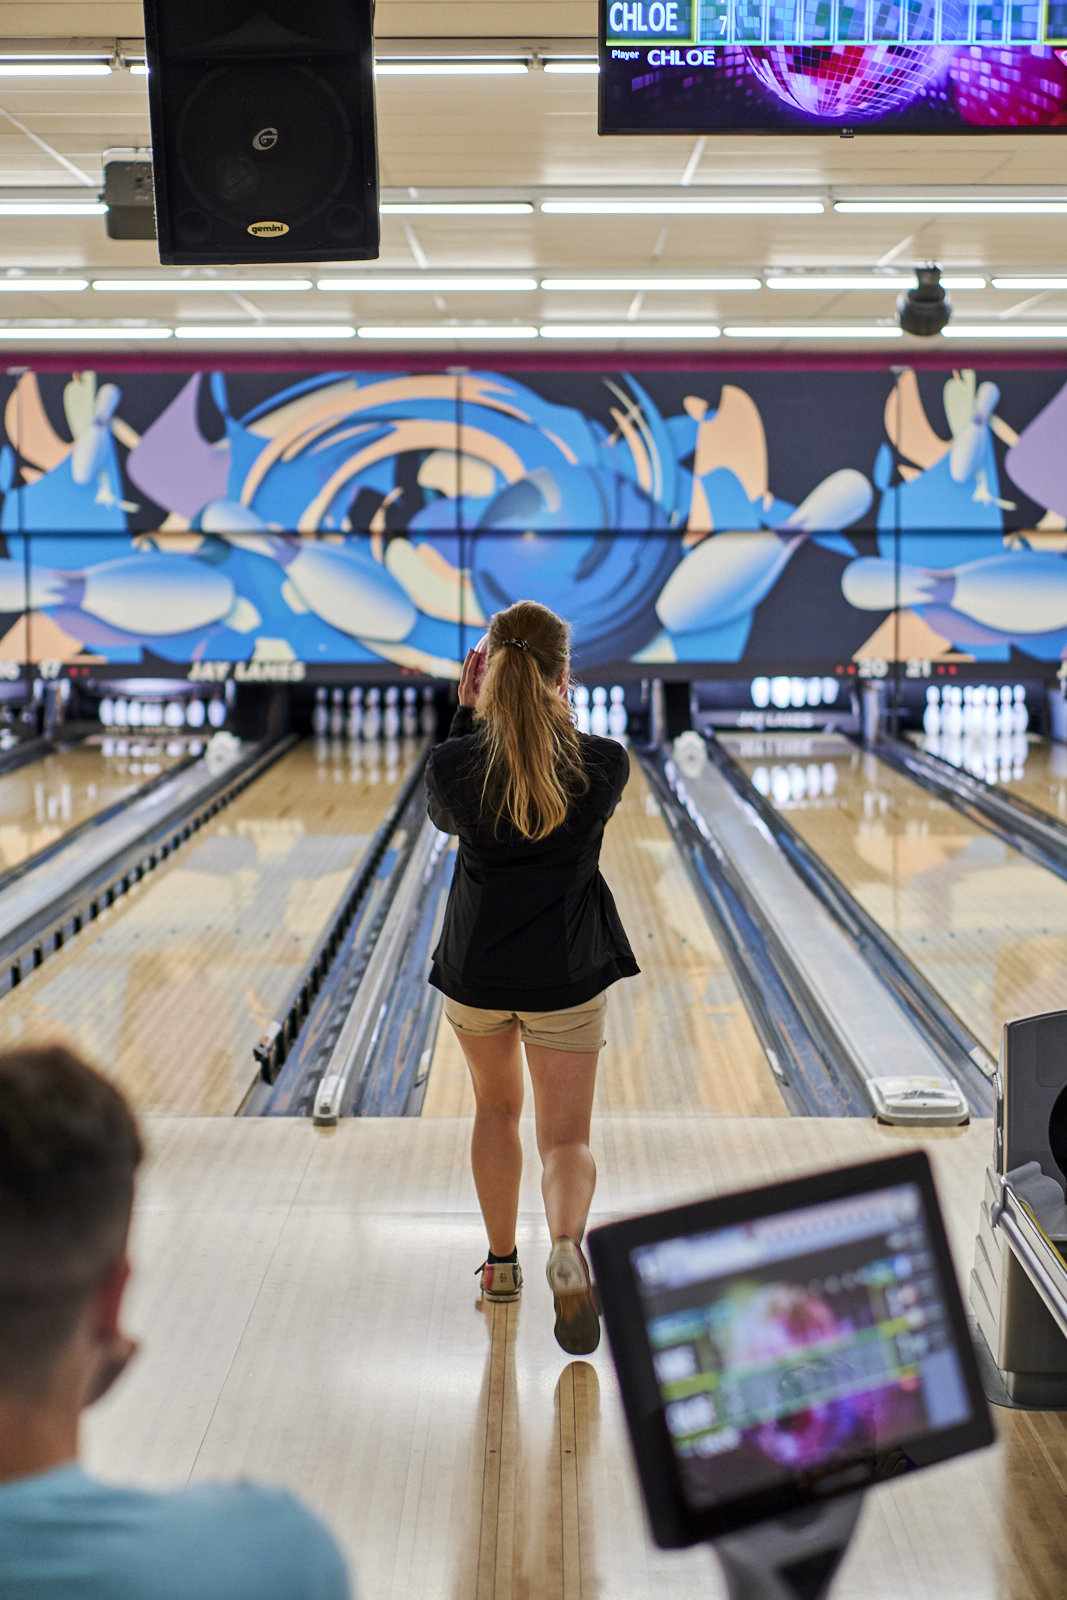 Get Ready to Strike! Bowling Tips for Beginners